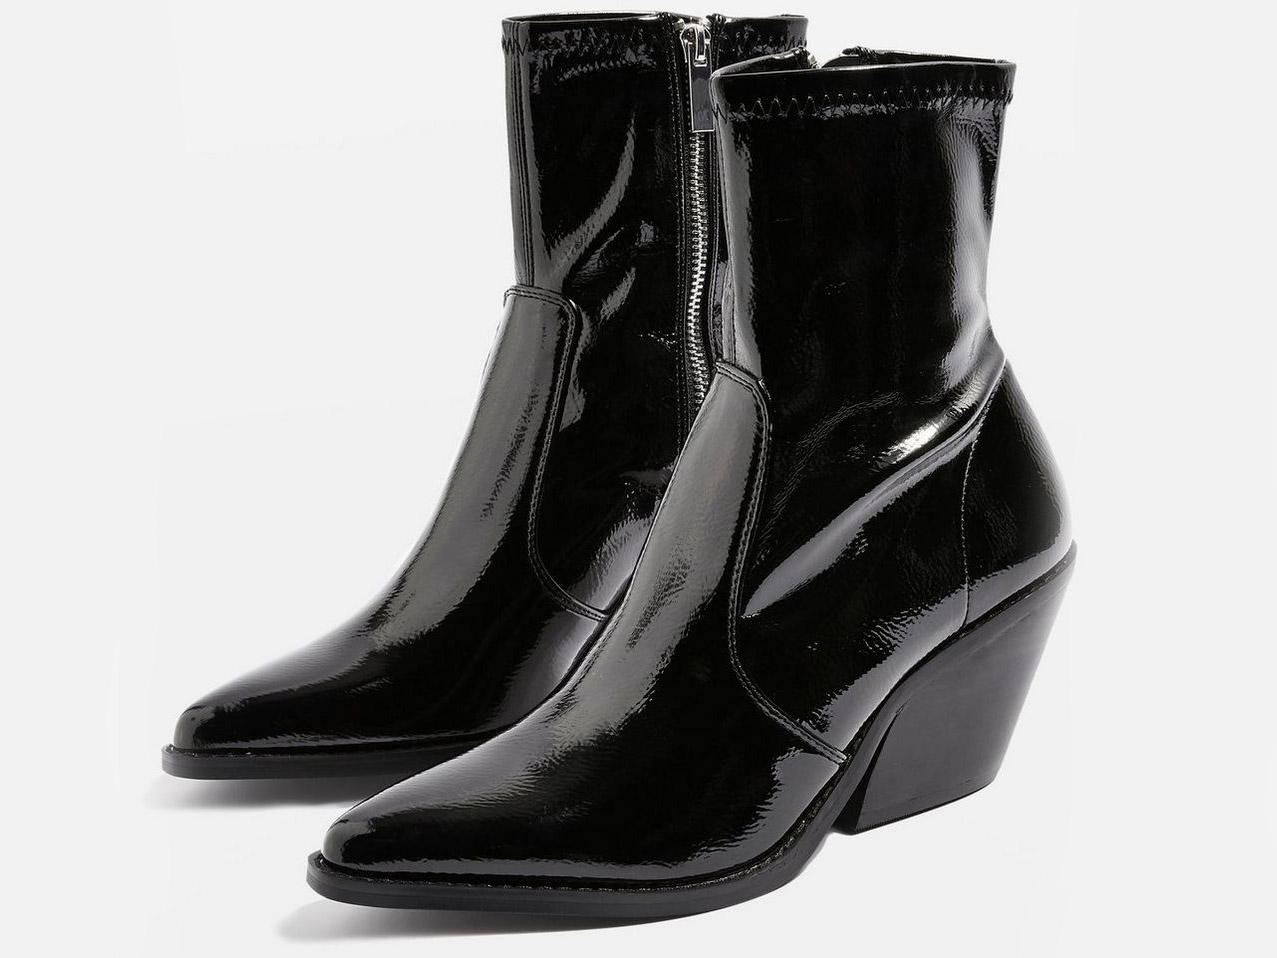 Mission Patent Western Boots, £65, Topshop